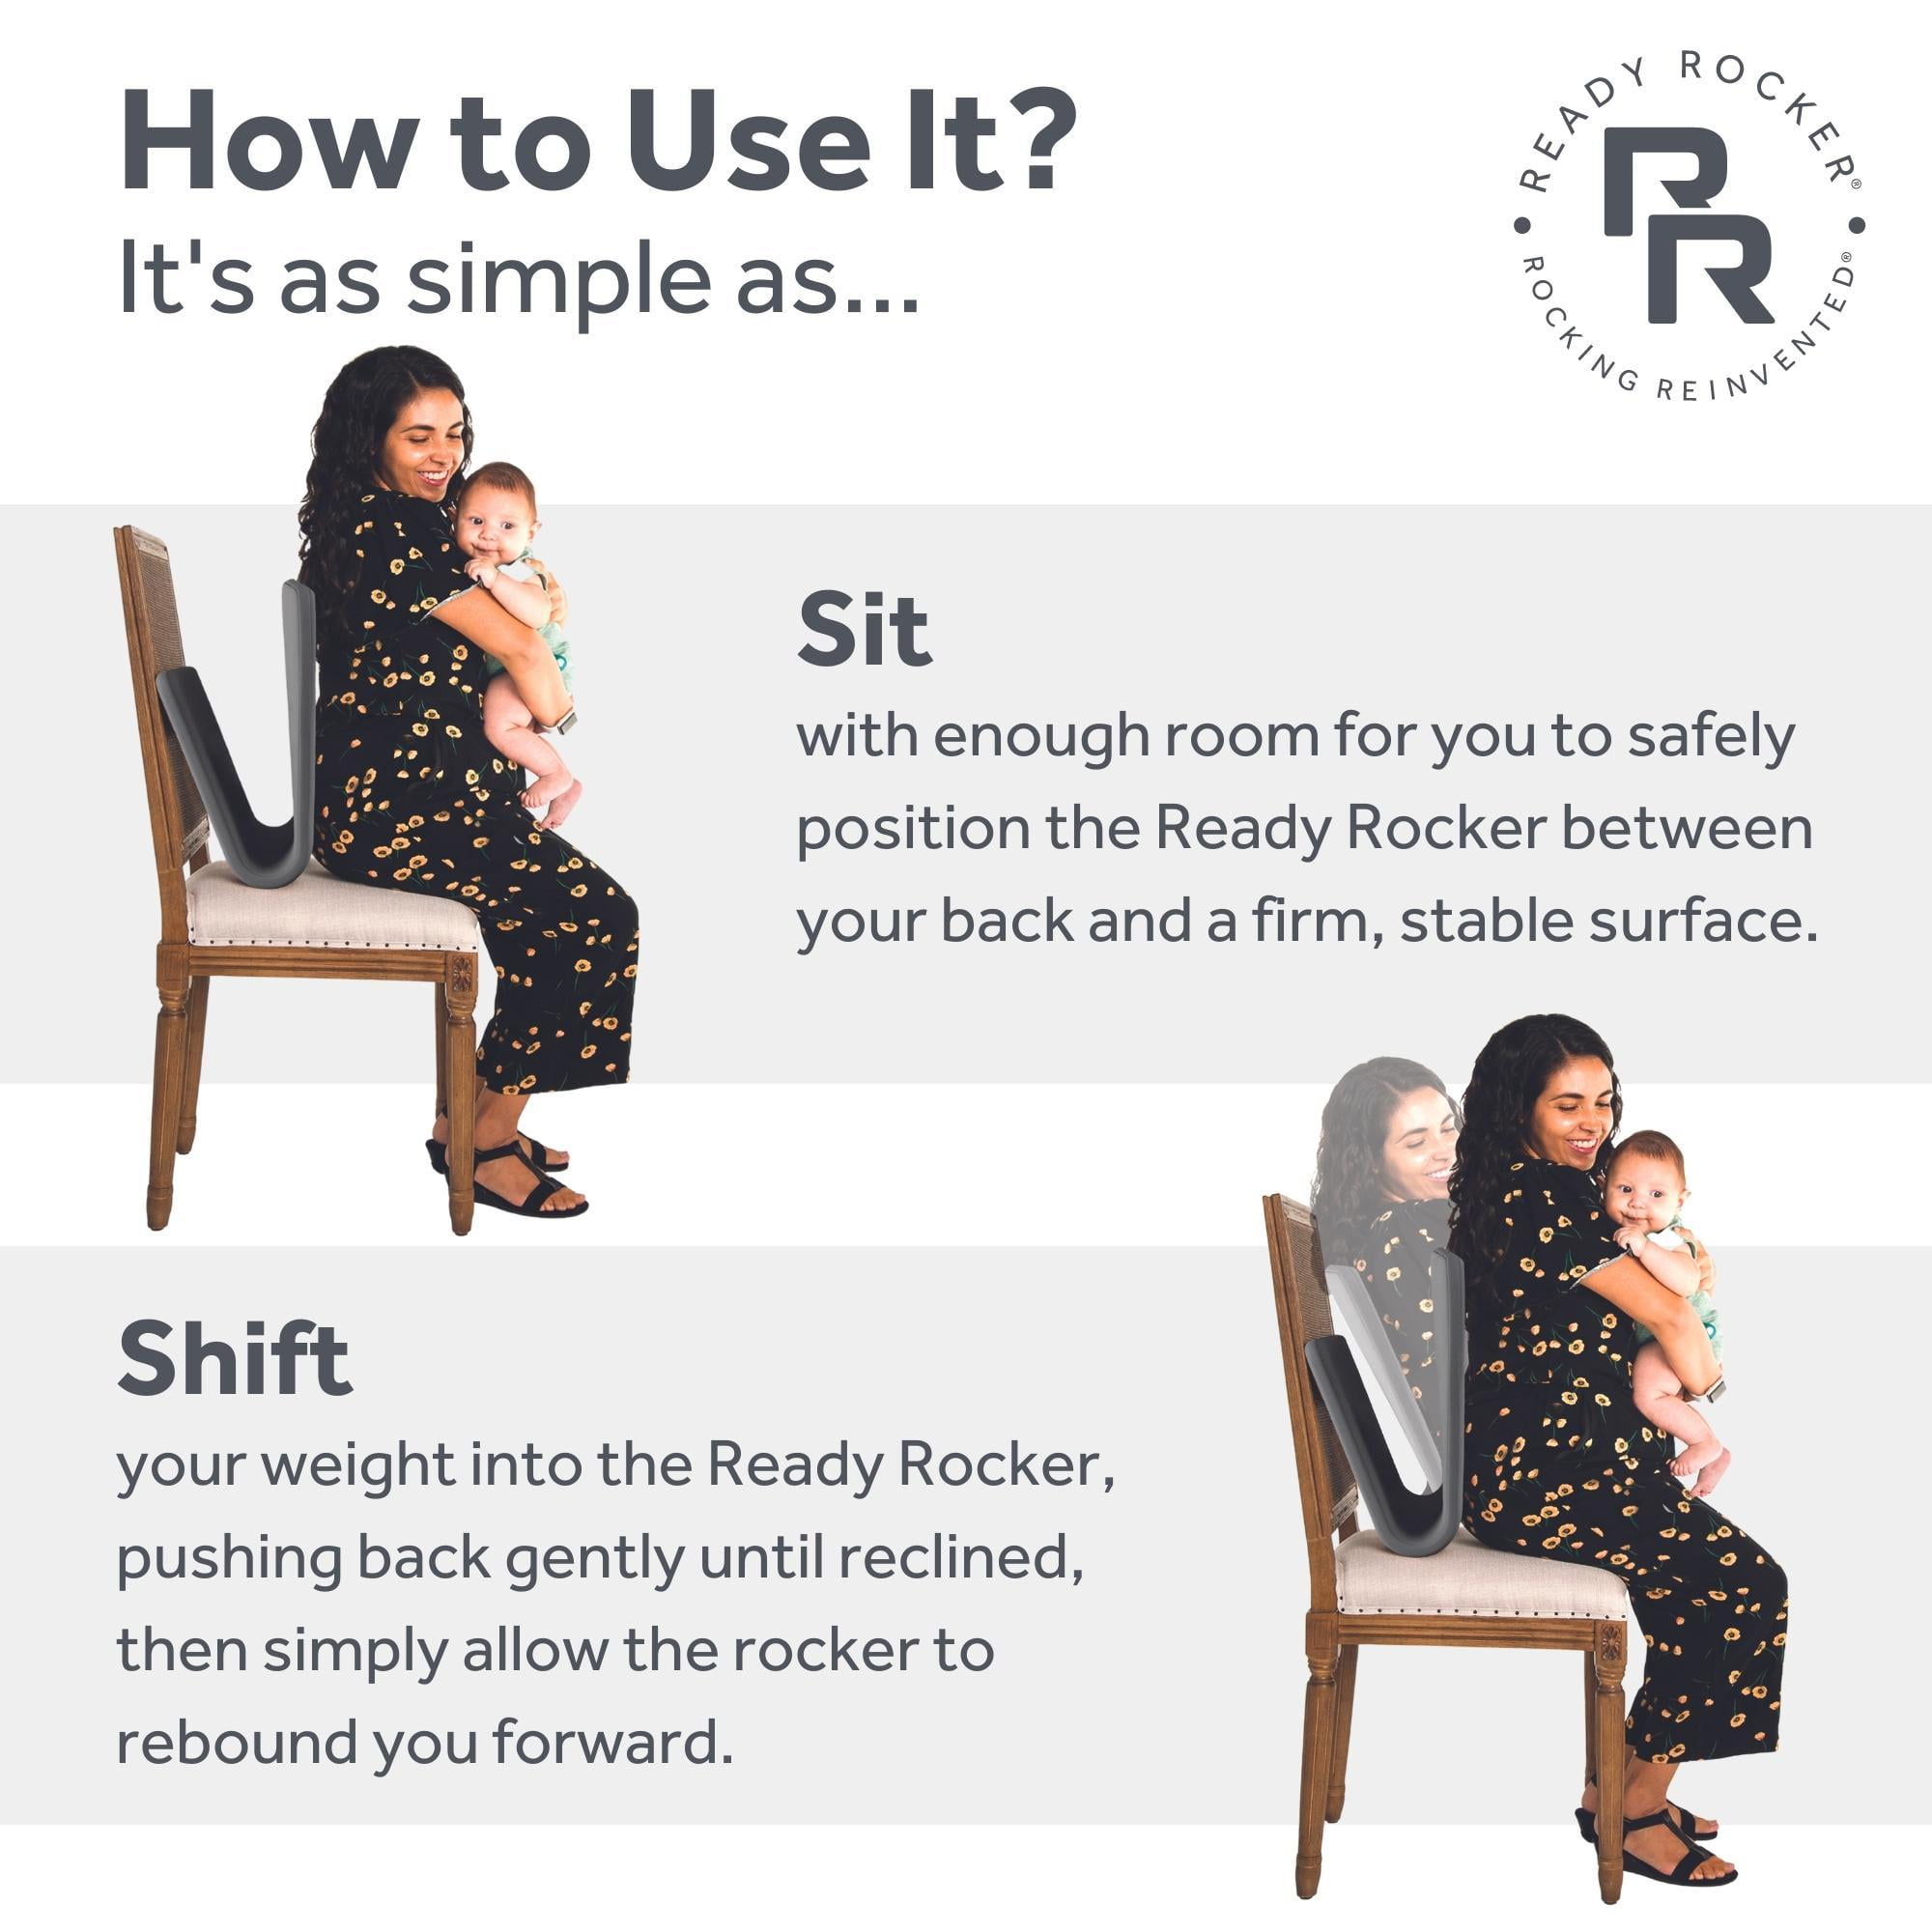 Ready Rocker - It's nearly a year since we first revealed